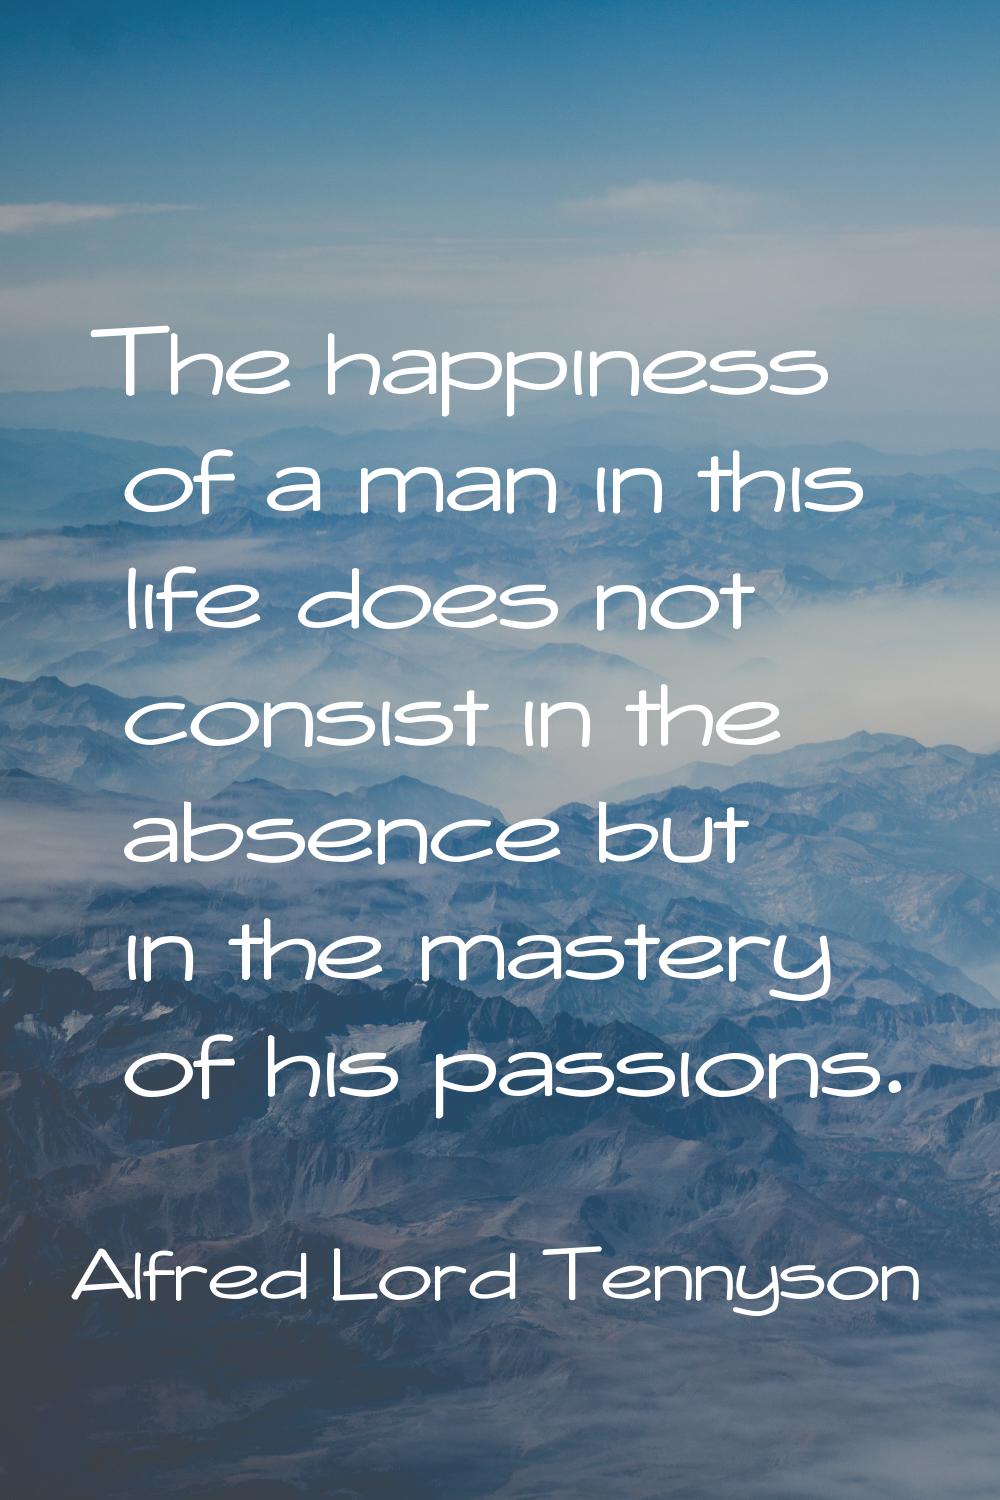 The happiness of a man in this life does not consist in the absence but in the mastery of his passi